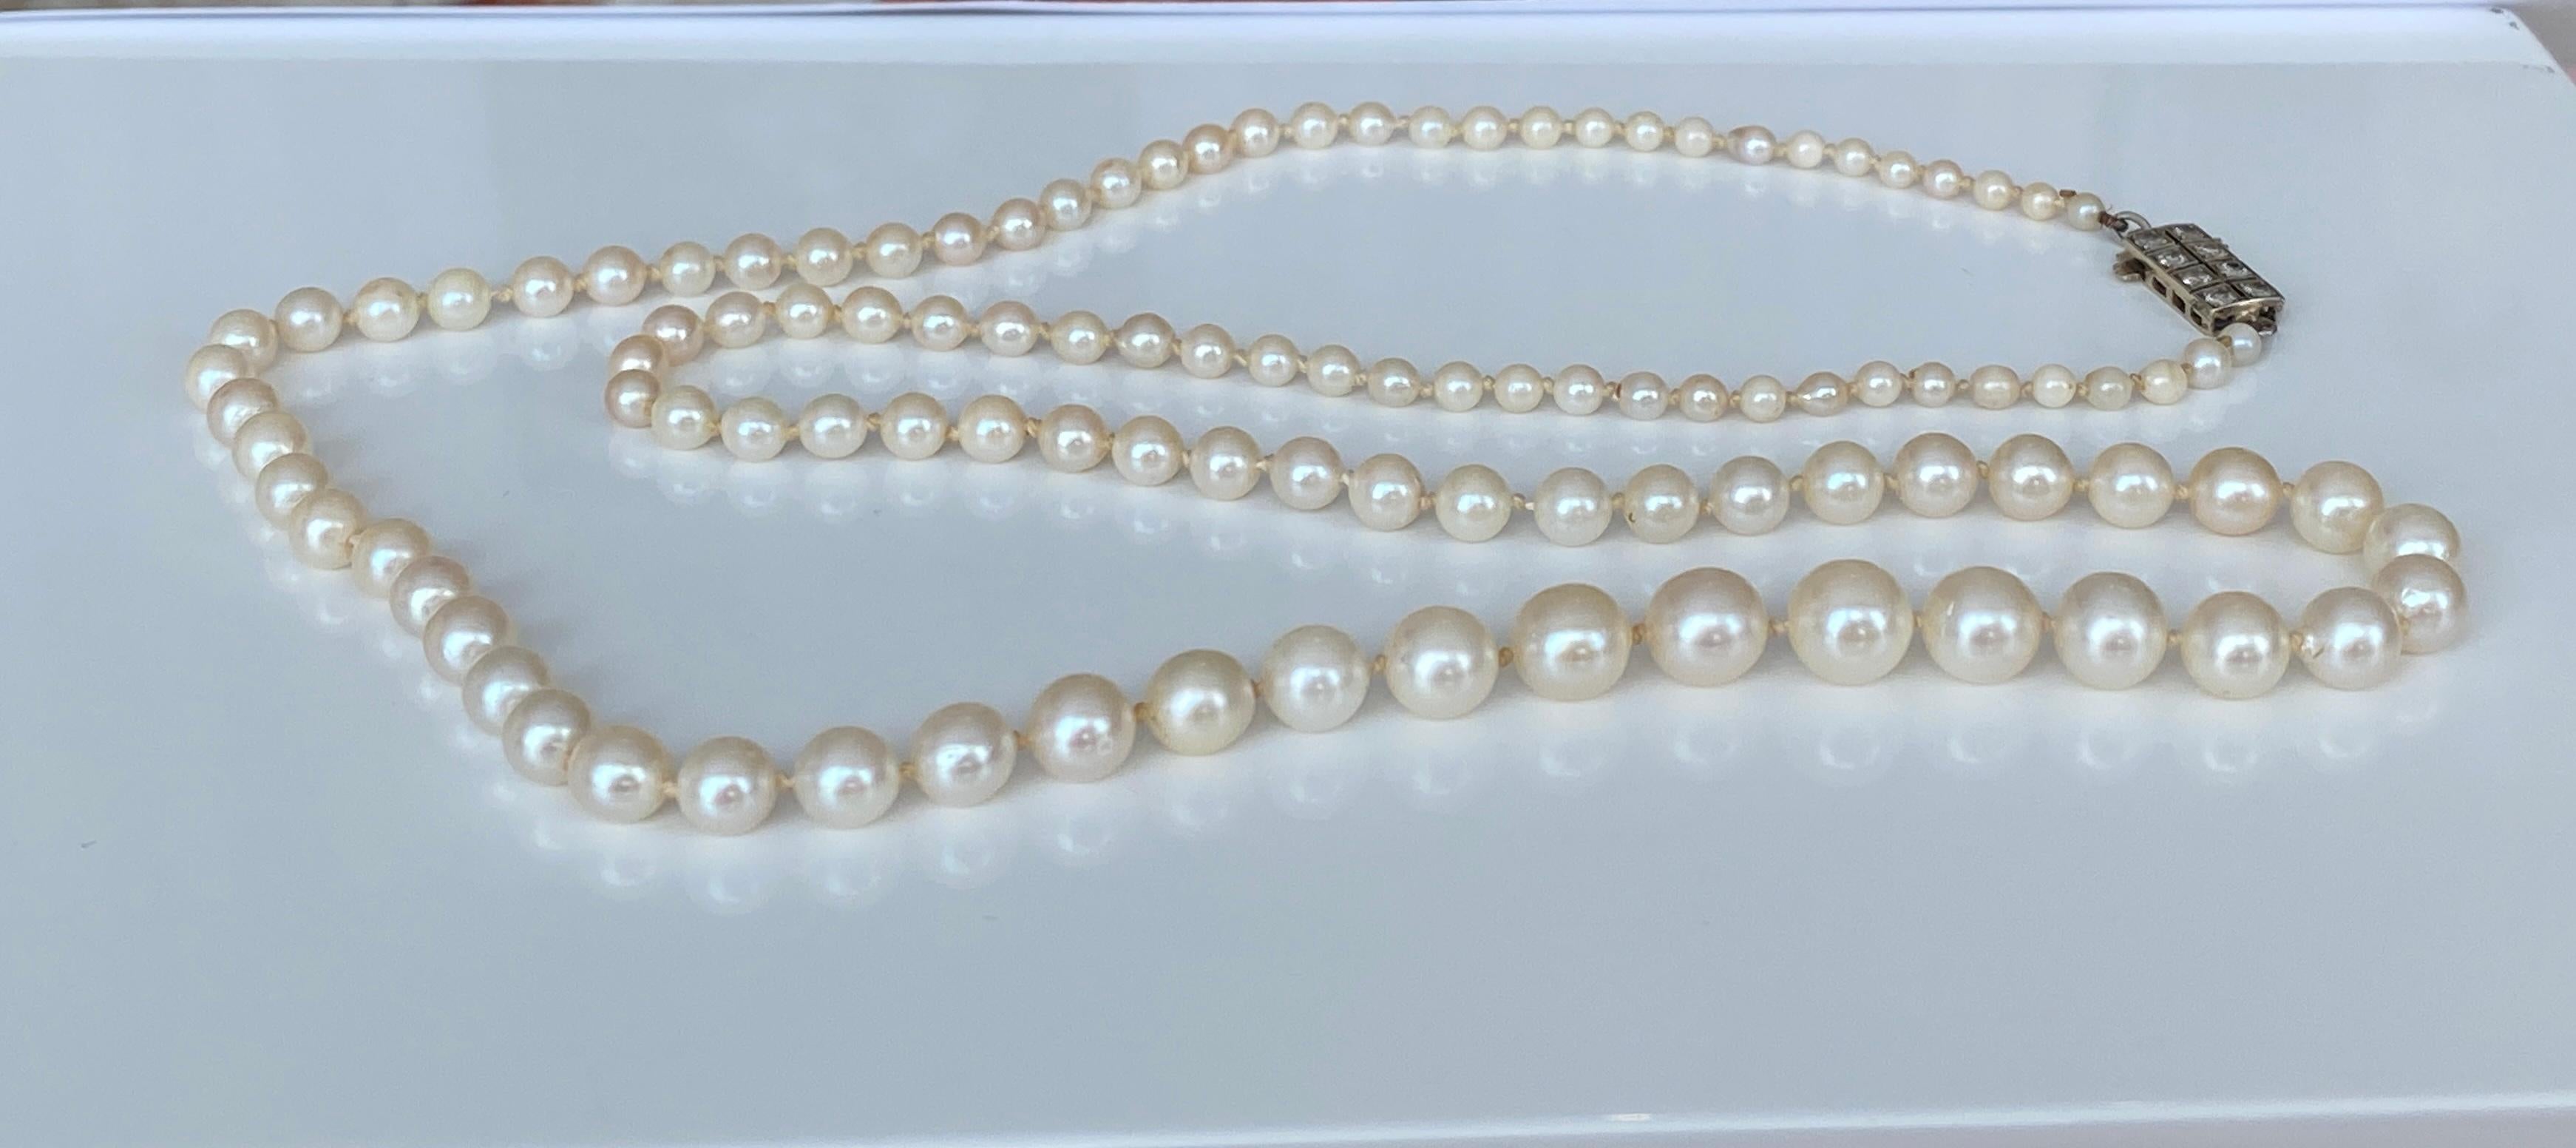 109 gleaming and luminous cultured Akoya pearls form this magnificent Art Deco-era necklace. The opera-length -20 inch- necklace is completed by a 18k yellow  gold clasp set with old-cut diamonds  The pearls range in size from 3.04mm to nearly